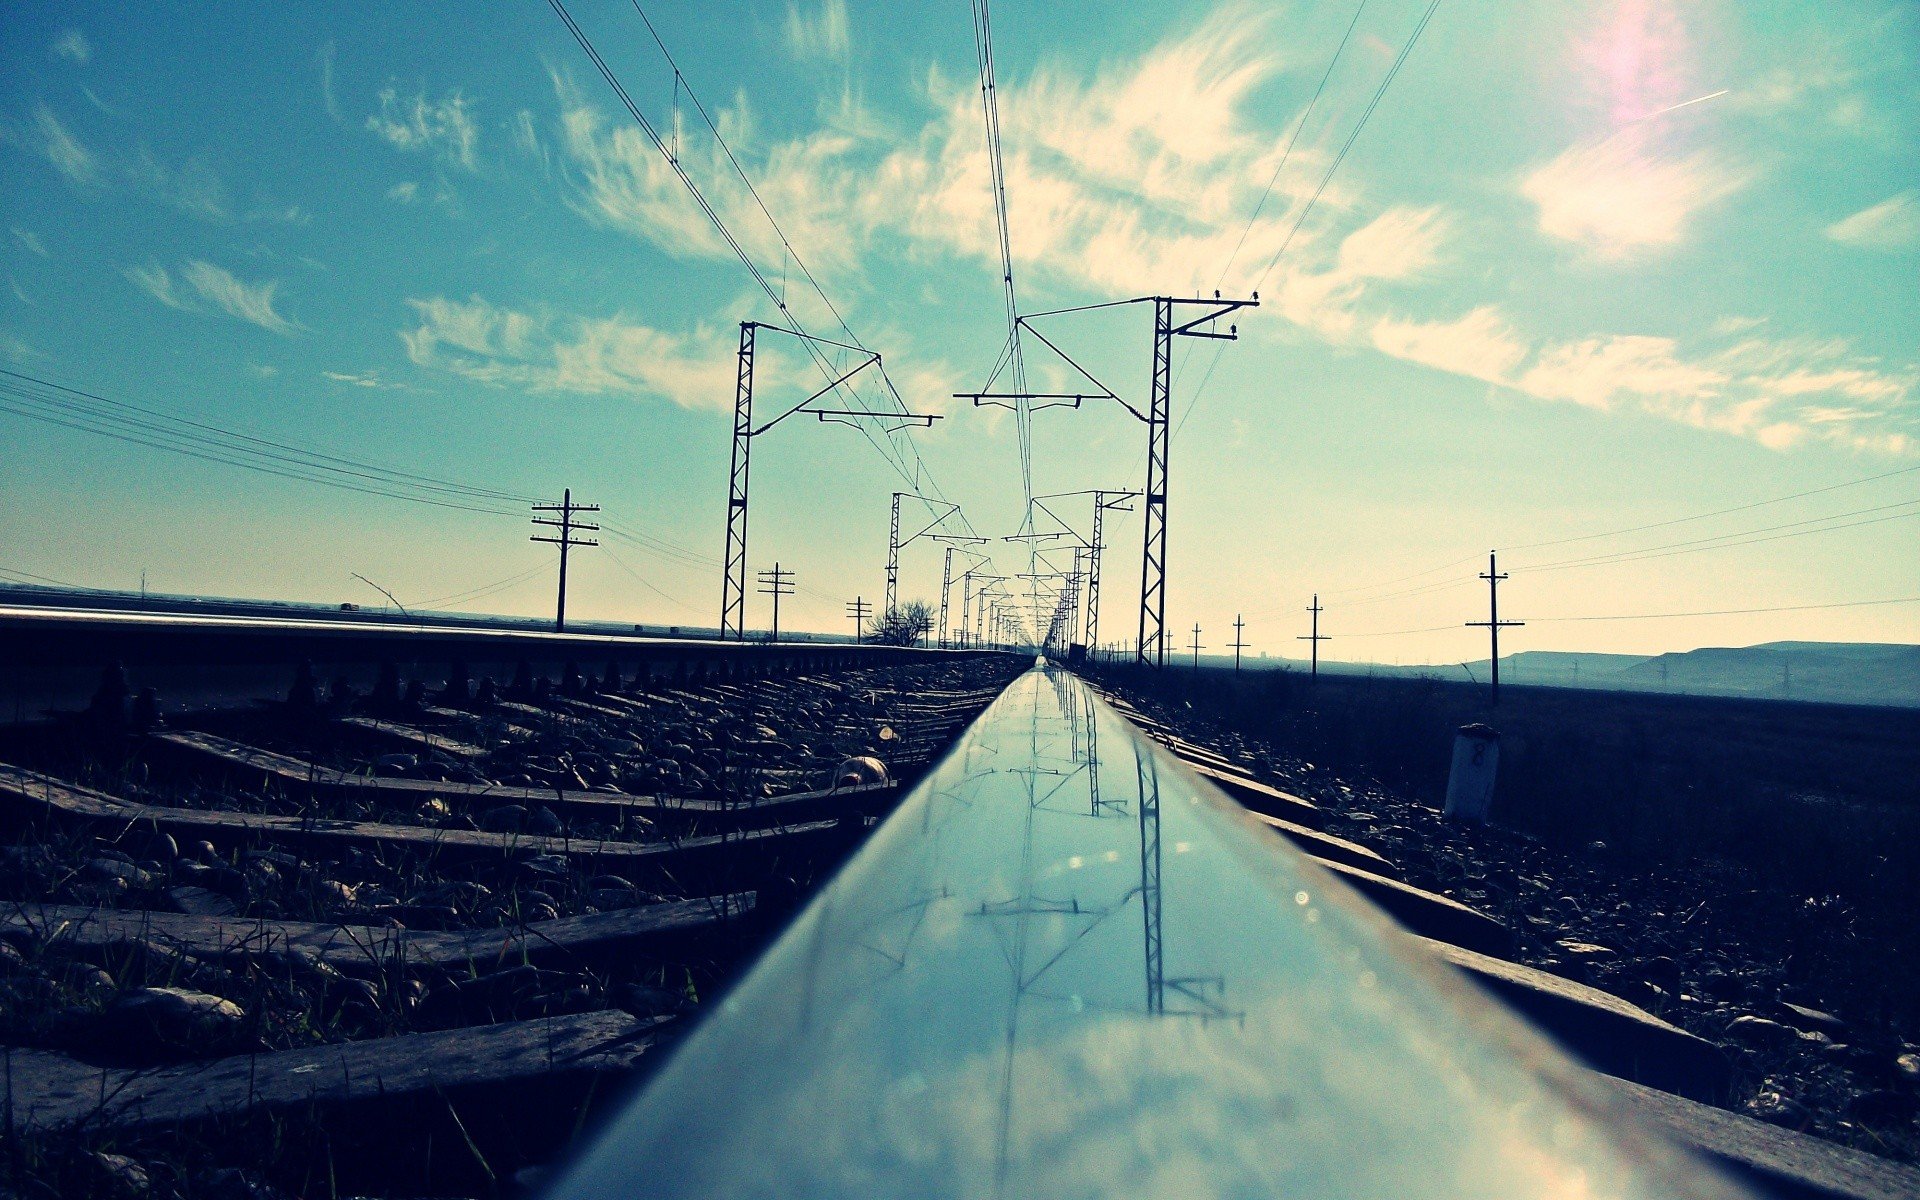 close up, Clouds, Landscapes, Hills, Railroad, Tracks, Scenic, Power, Lines, Skyscapes, Worms, Eye, View Wallpaper